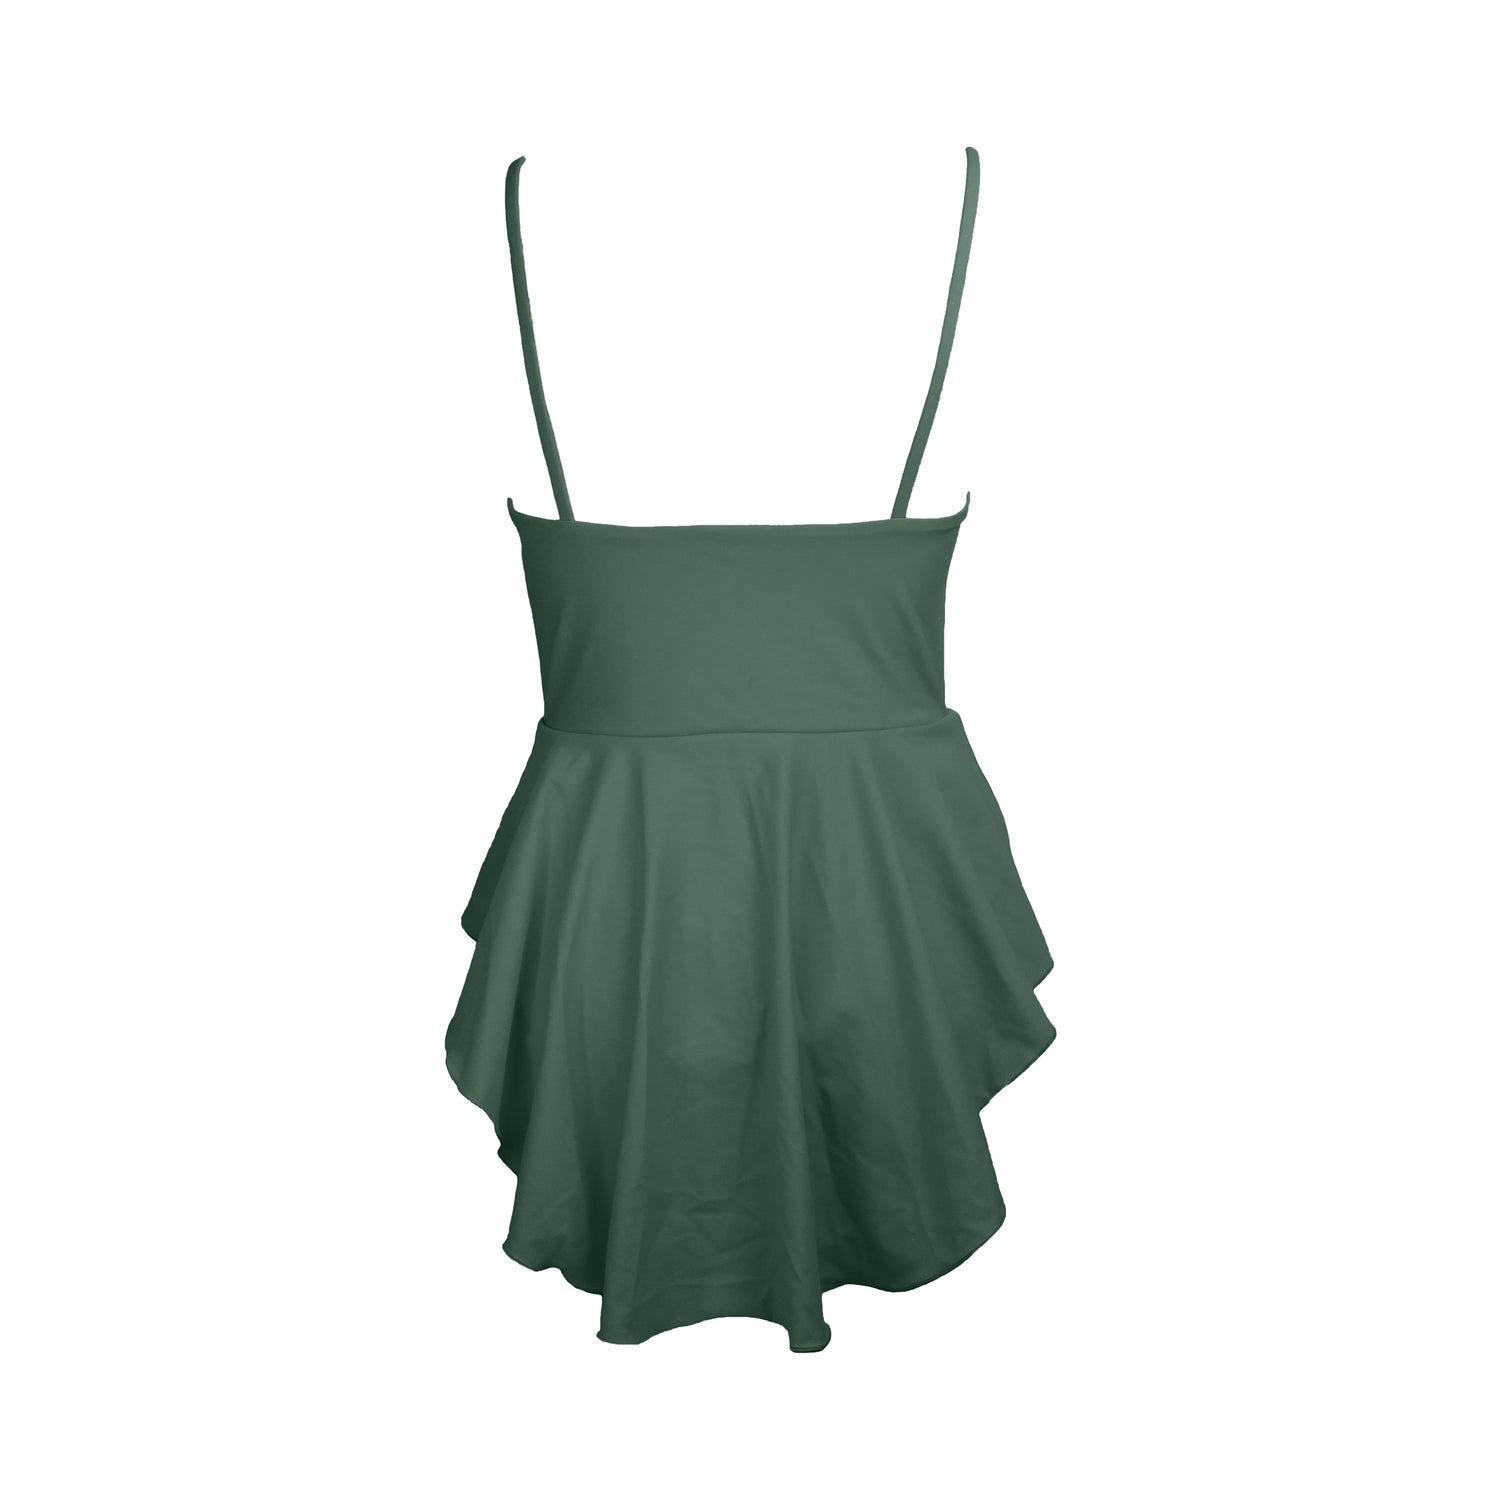 Back view of sage green simplistic plunging v-neck one piece swimsuit with an added high-low skater skirt overlay. Under the skirt layer the bodys bottom half has a low  back, high cut legs and full coverage.